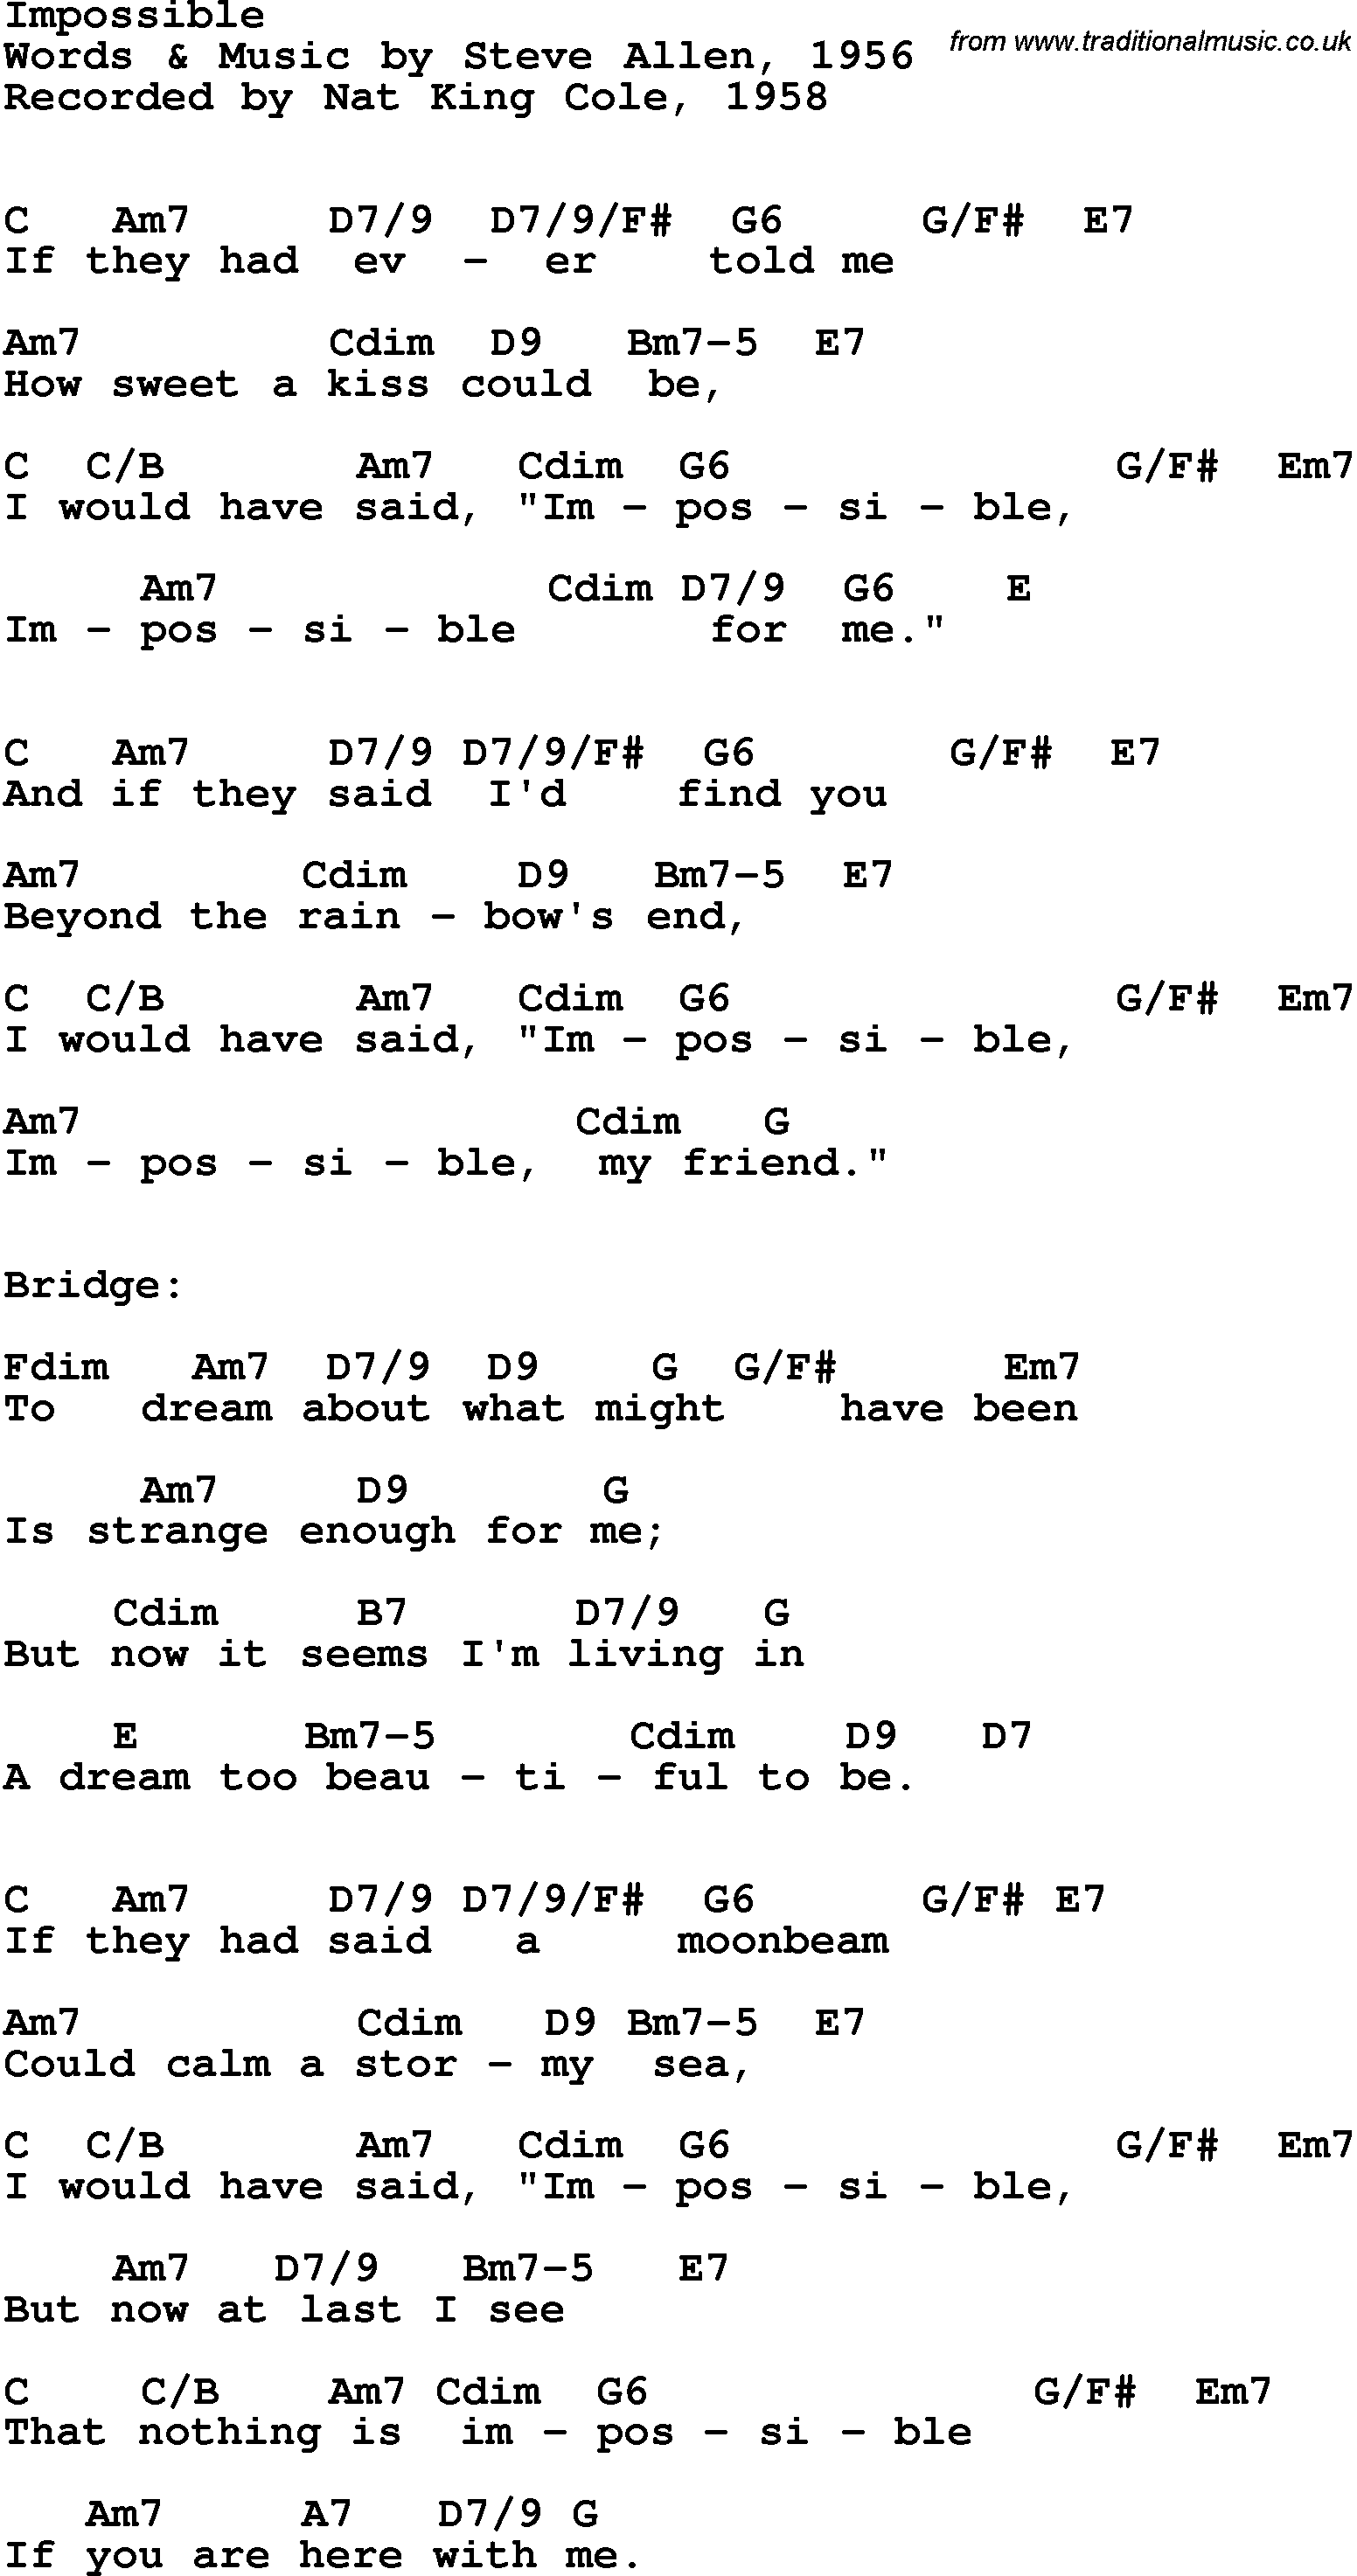 Song Lyrics with guitar chords for Impossible - Nat King Cole, 1958